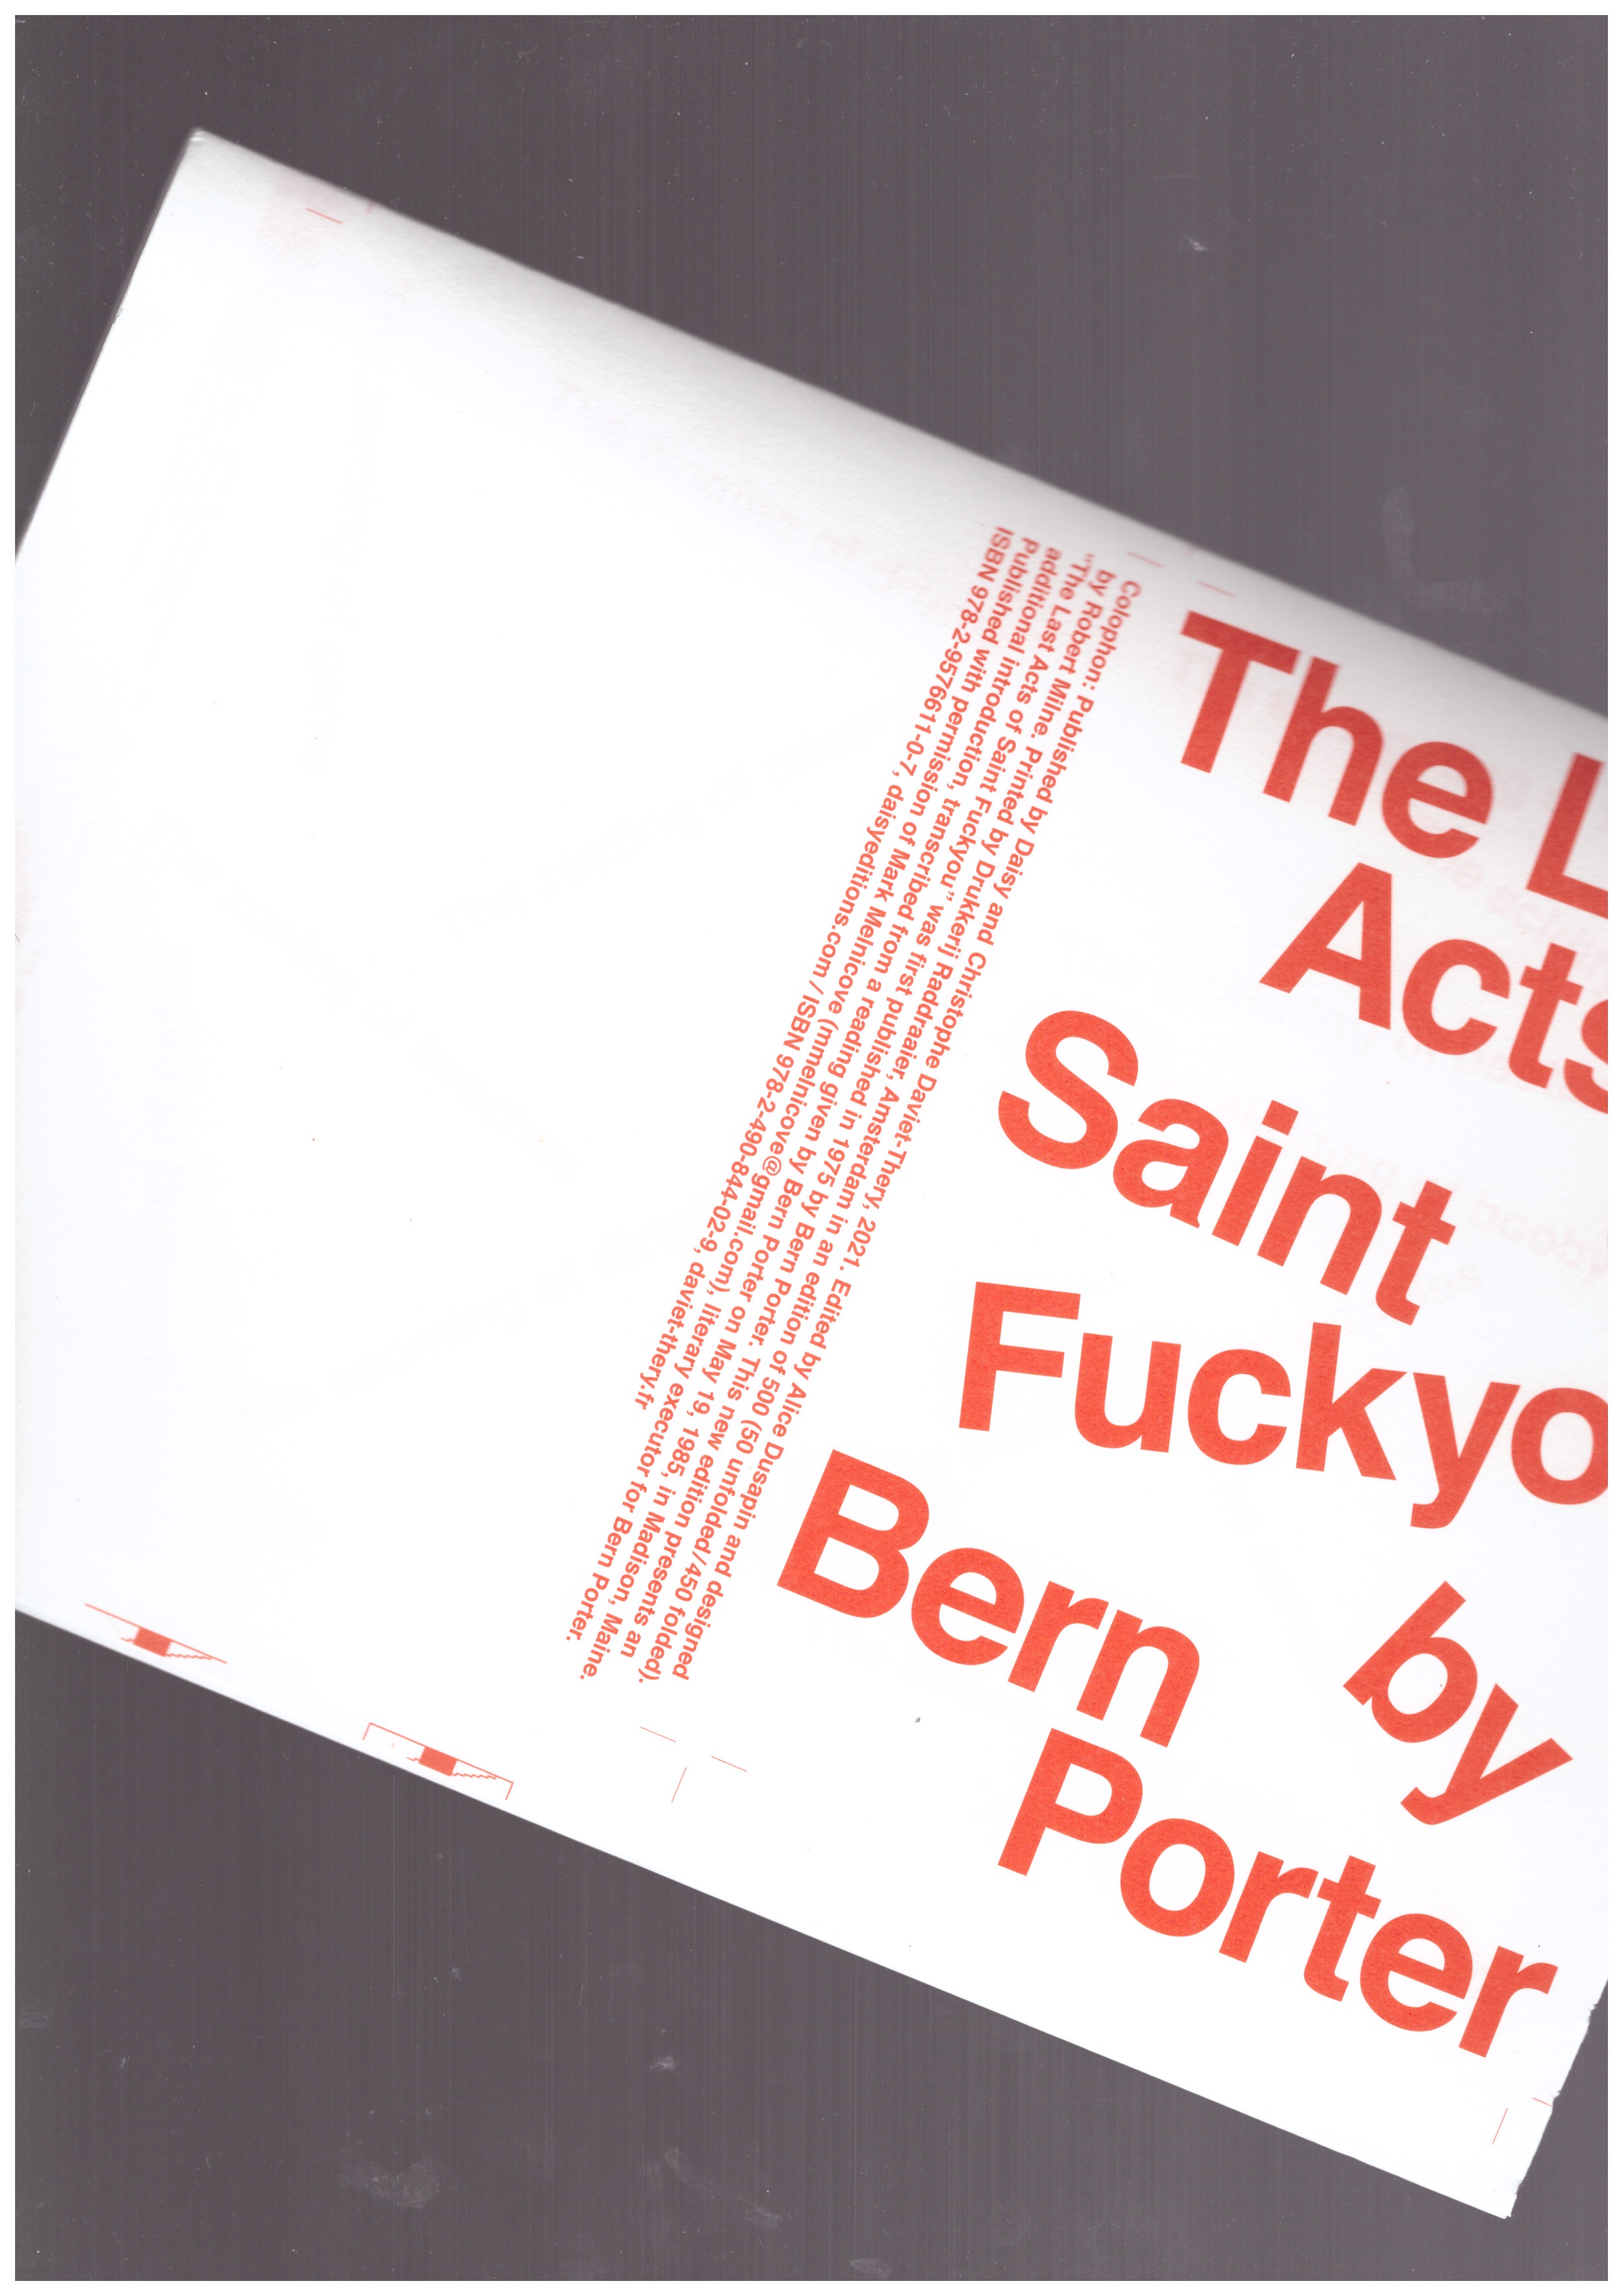 PORTER, Ben - The Last Acts of Saint Fuck You